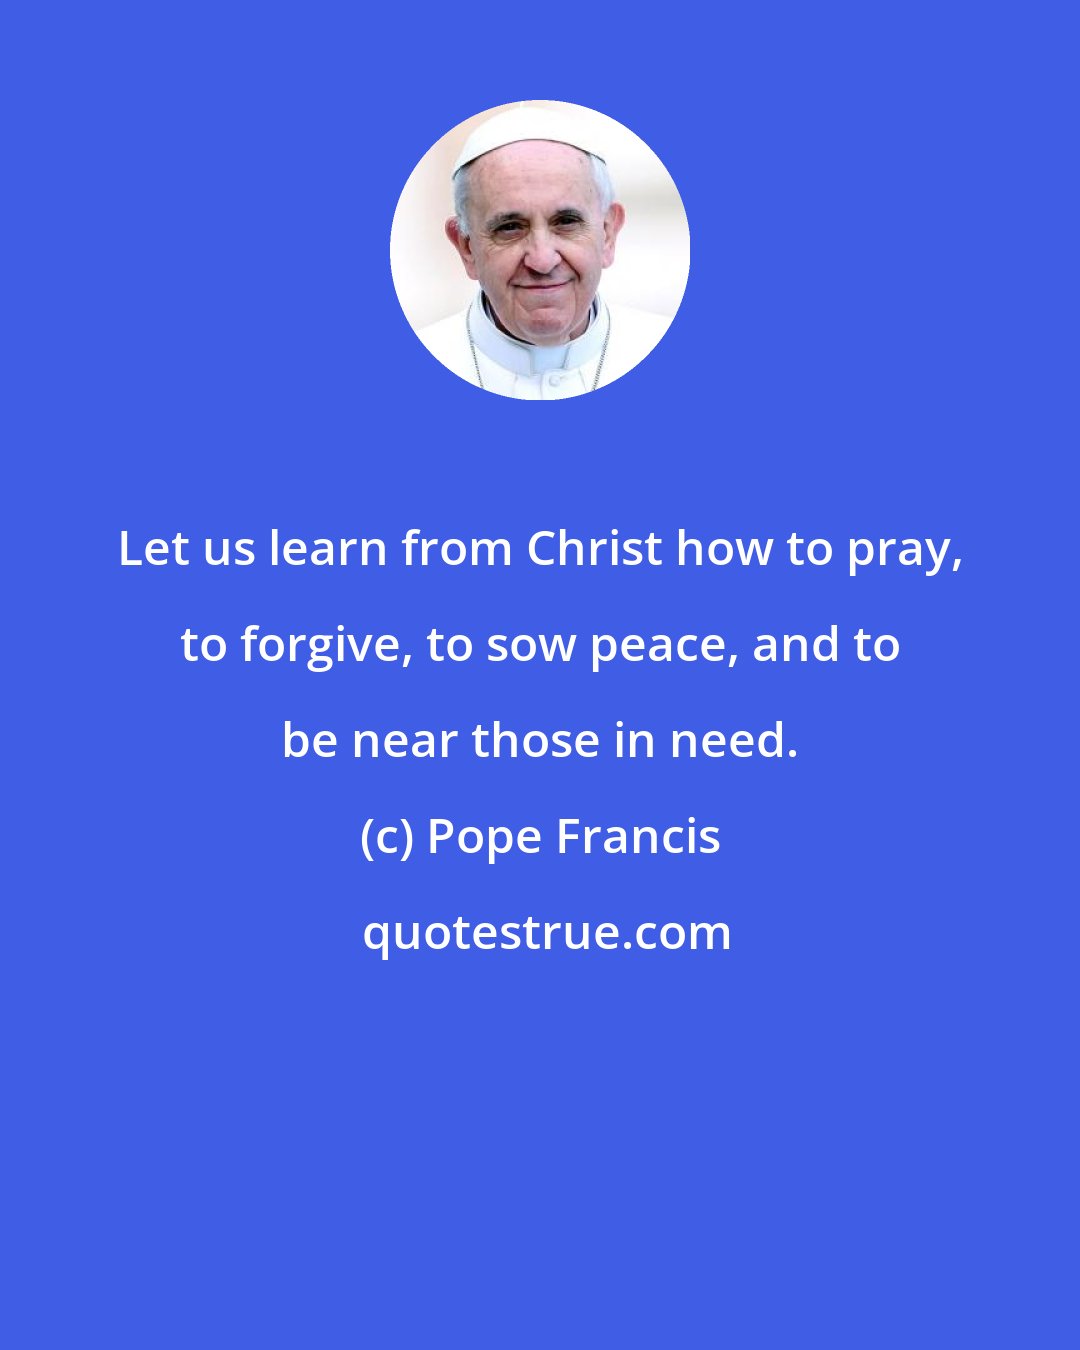 Pope Francis: Let us learn from Christ how to pray, to forgive, to sow peace, and to be near those in need.